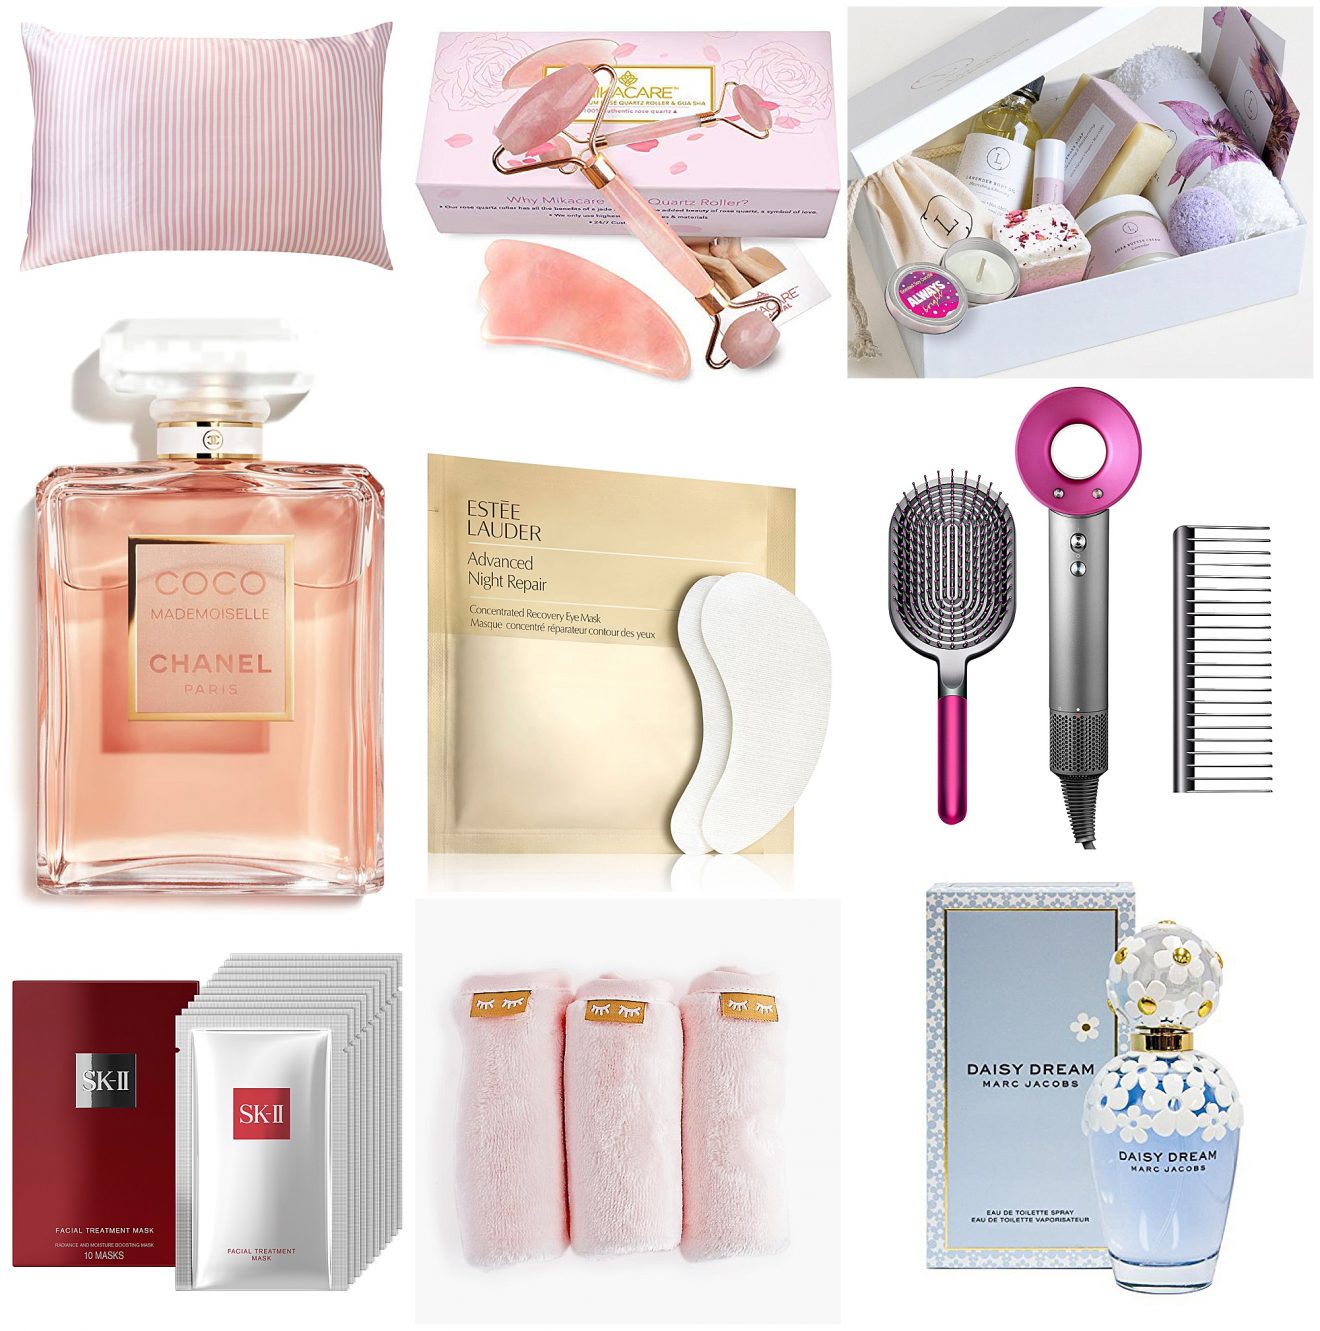 Gifts for the woman who loves beauty items.